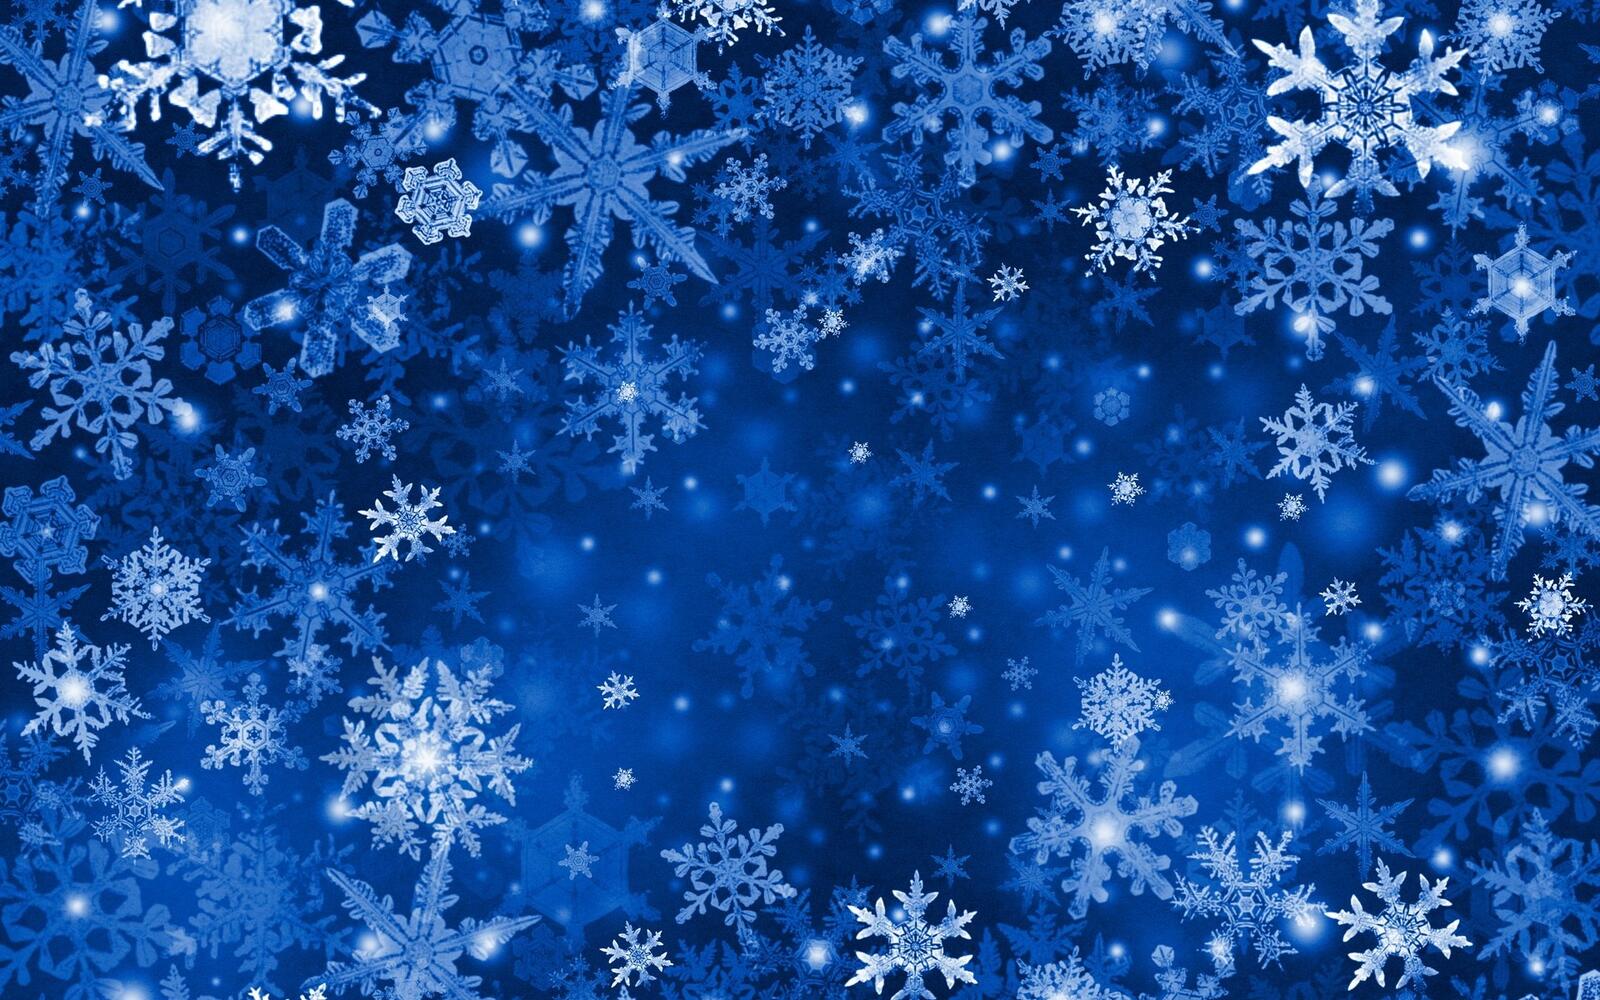 Wallpapers snowflakes blue background miscellaneous on the desktop